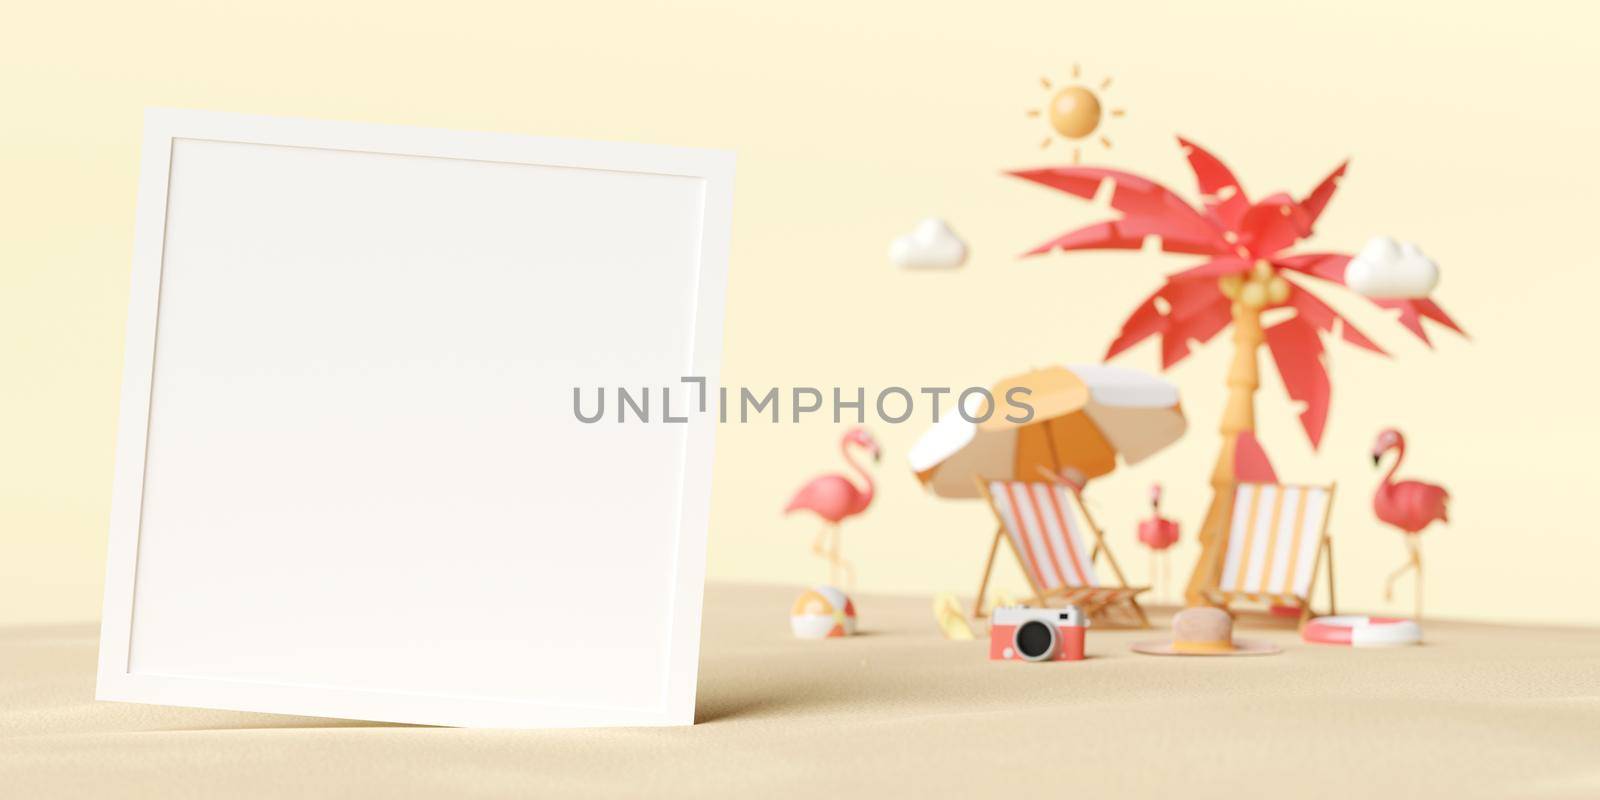 3d illustration of blank photo mockup on the beach with summer background by nutzchotwarut